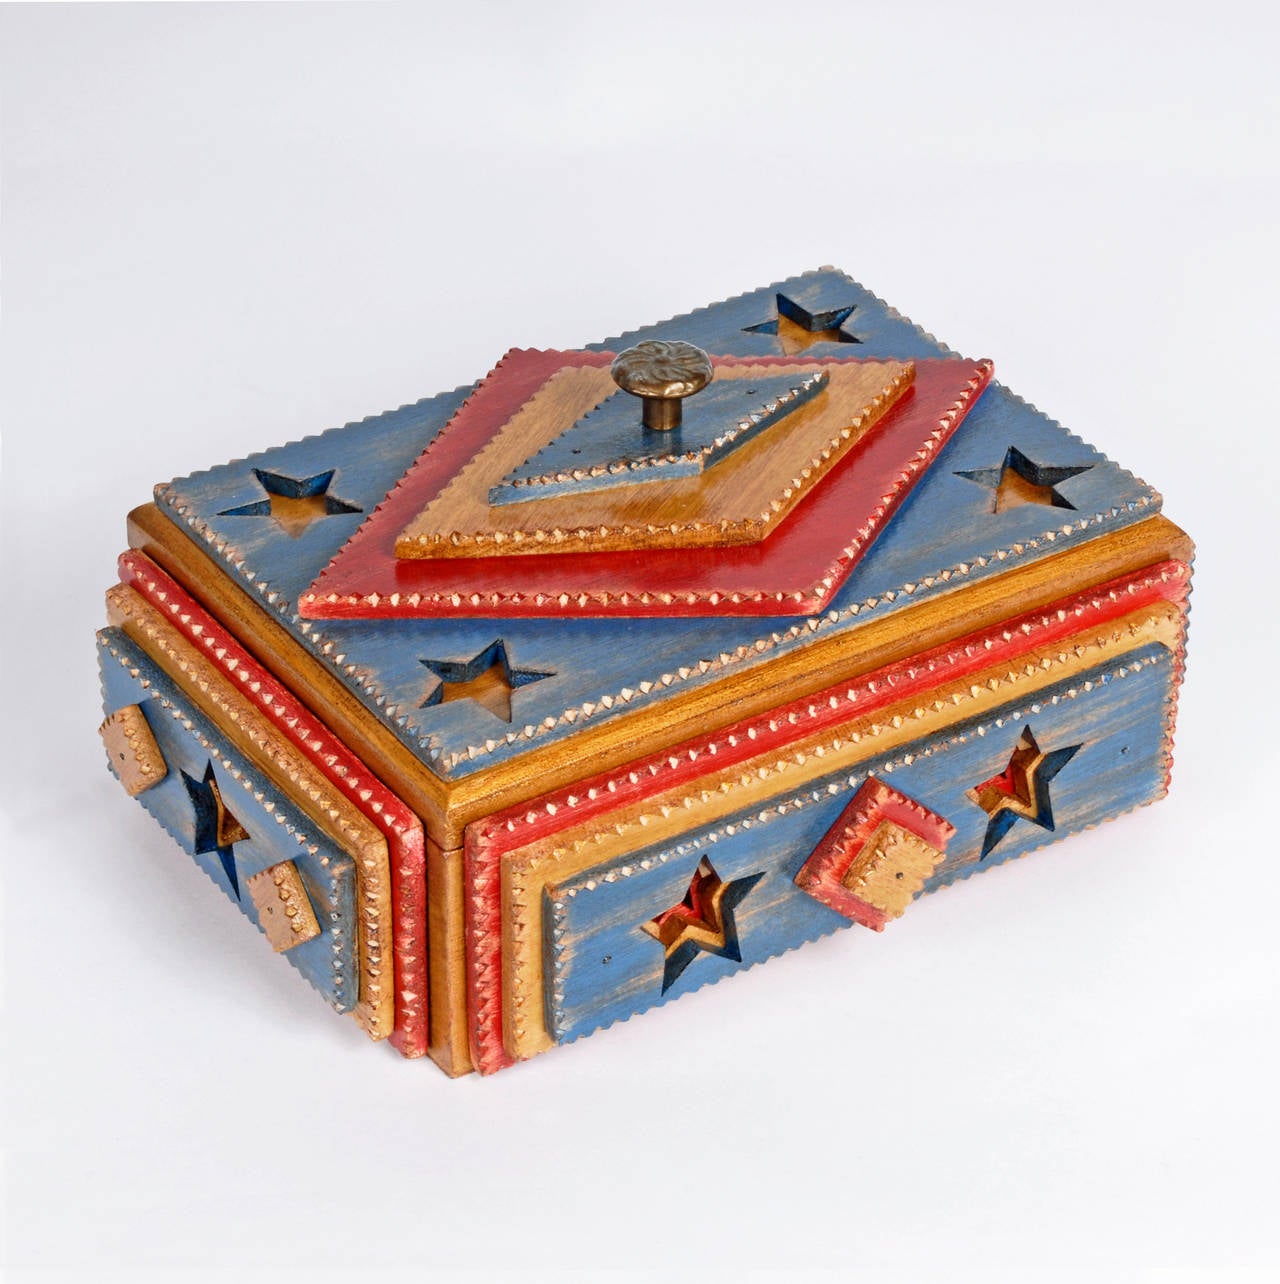 Wonderful patriotic inspired Tramp Art box by Angie Dow. The recessed stars add to the beauty of the object and is an unusual treatment for Tramp Art where stacking and layering are the most common techniques.